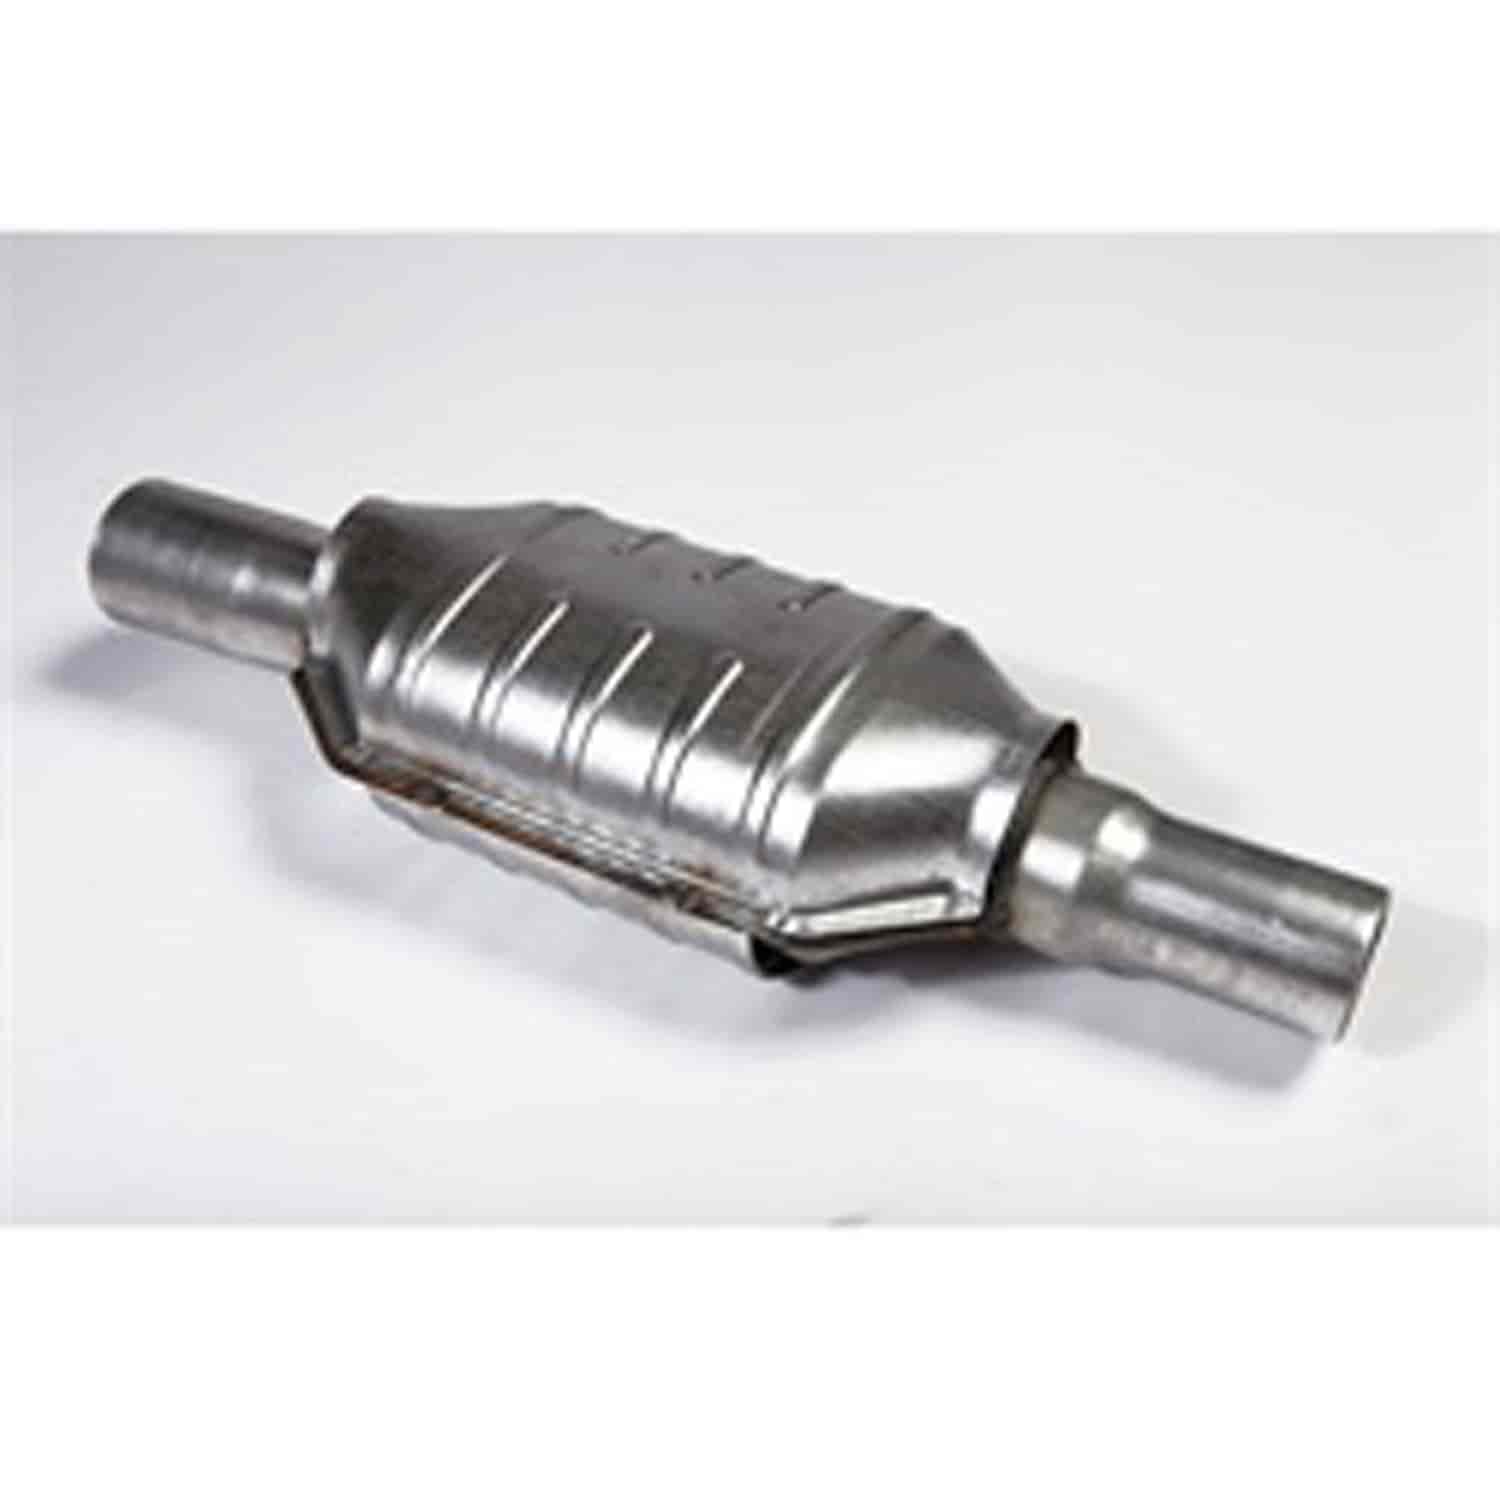 Replacement catalytic converter from Omix-ADA, Fits 96-01 Jeep Cherokees and Grand Cherokees.